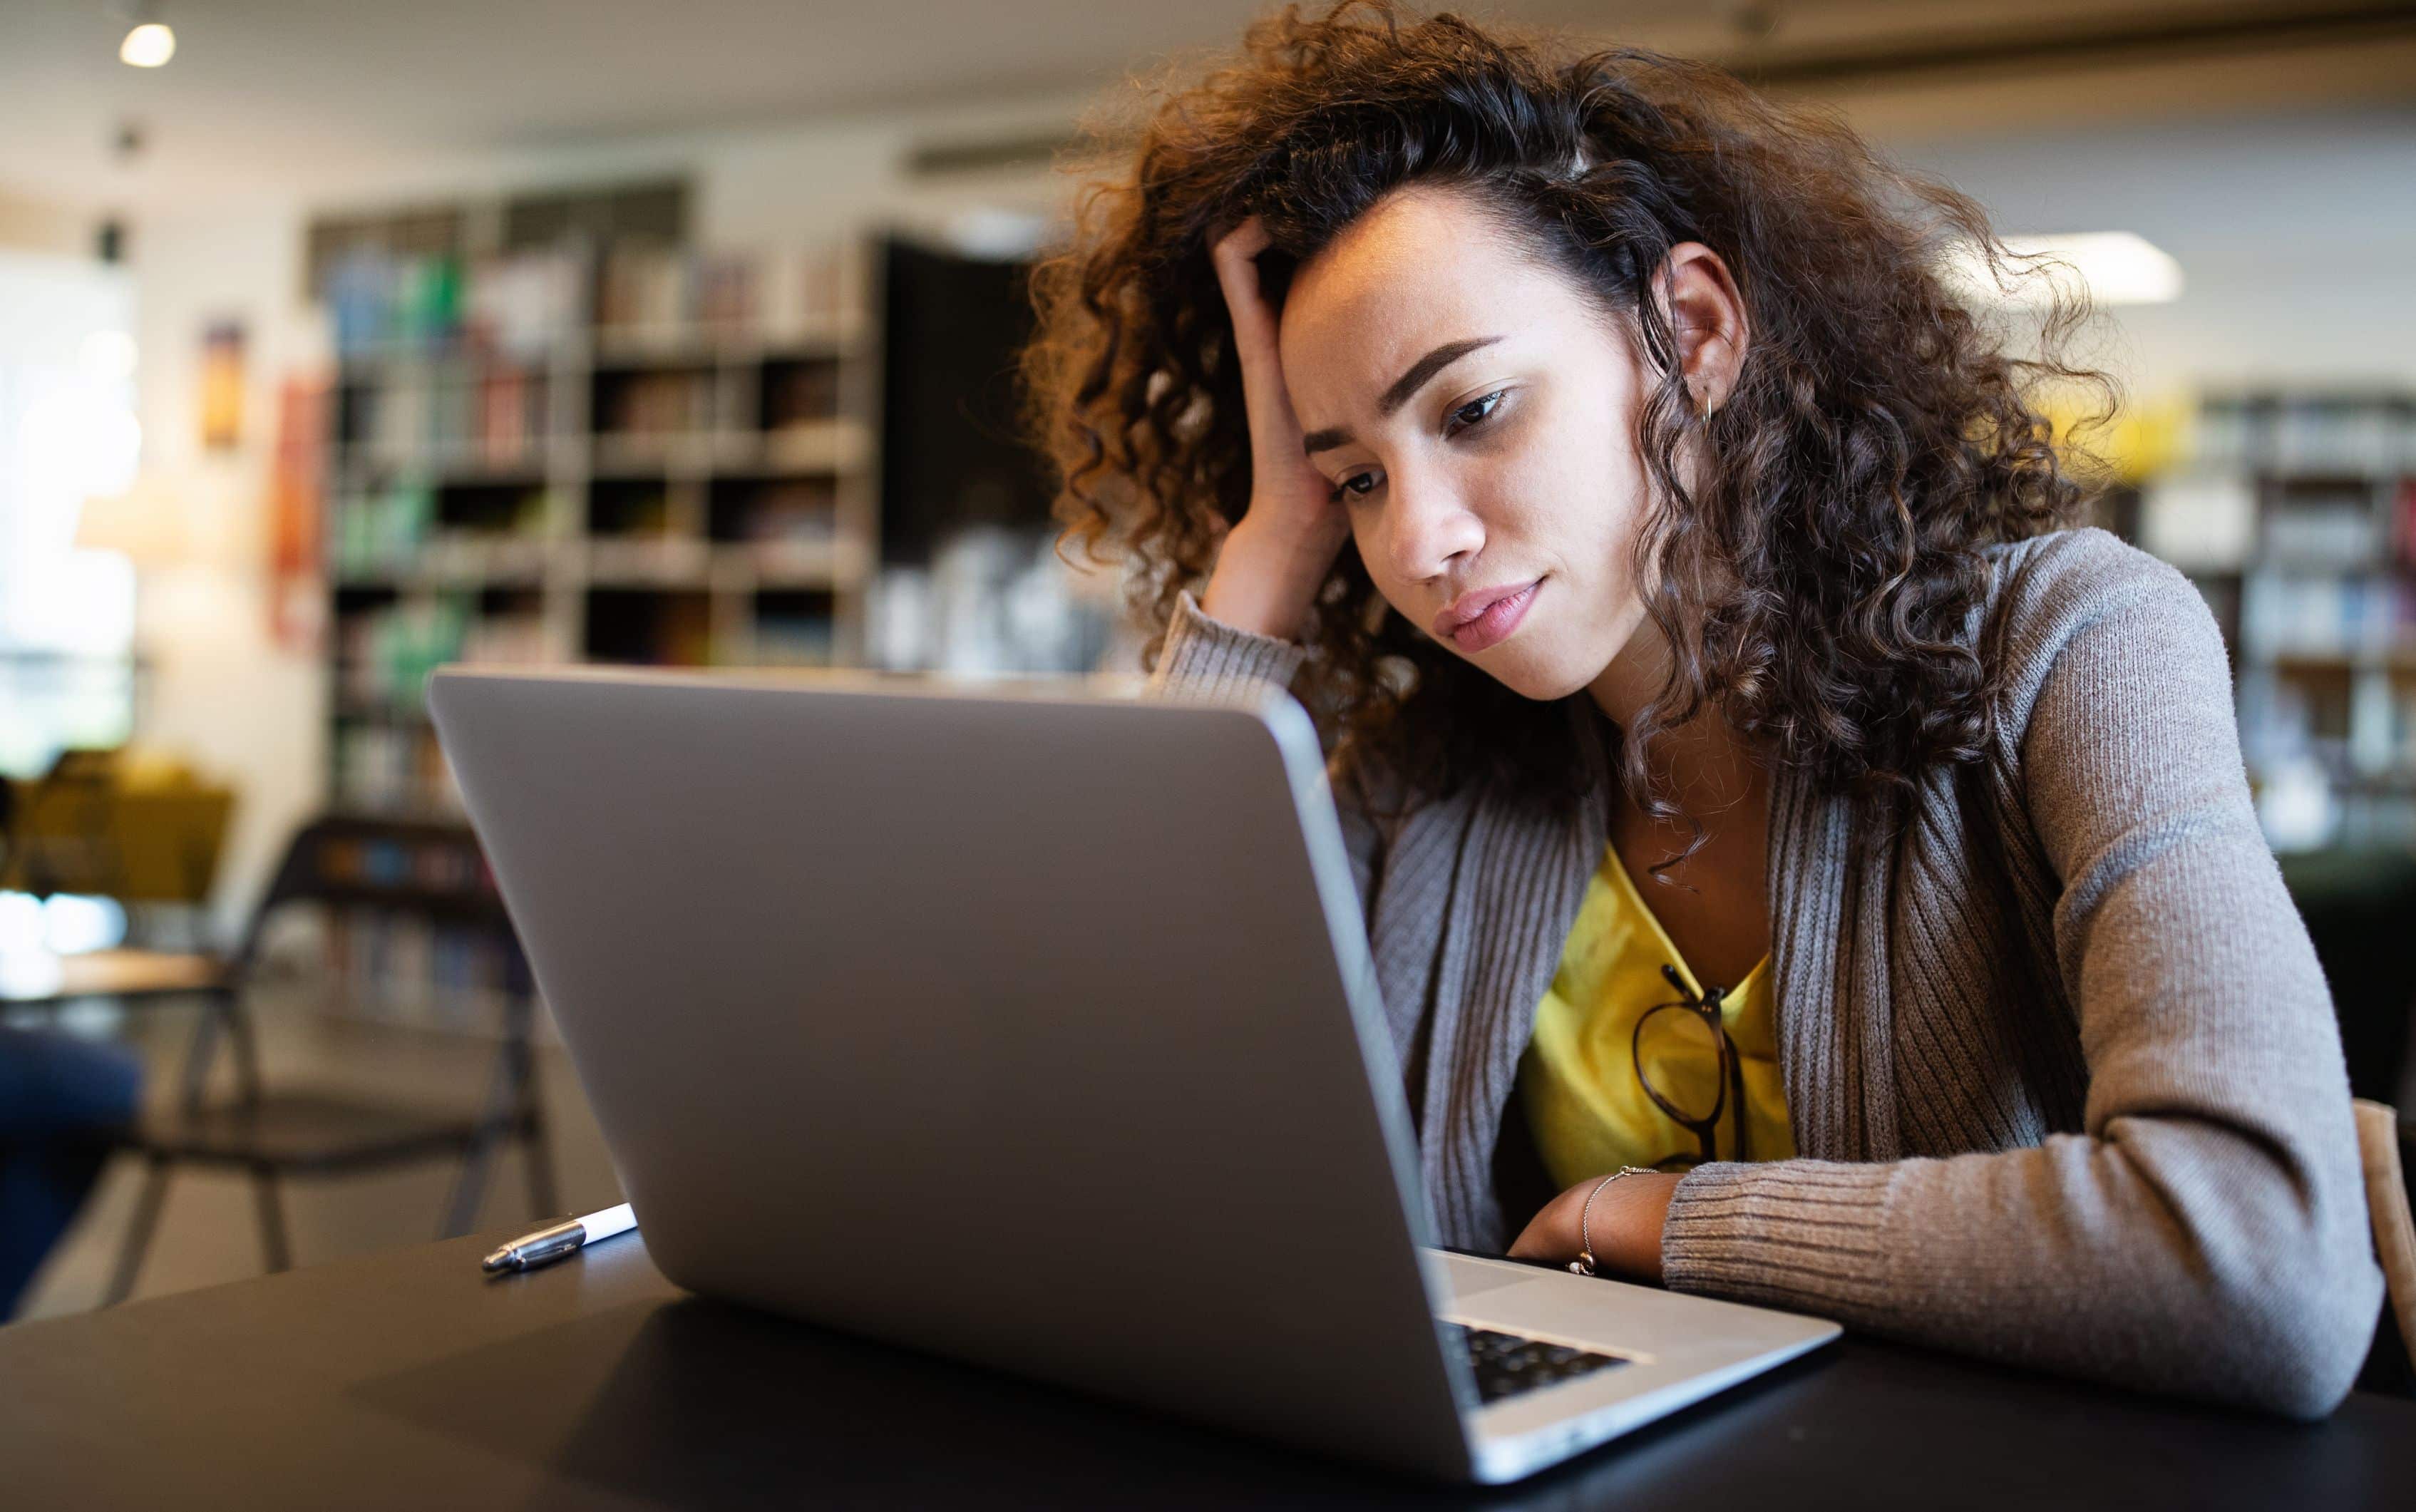 Student woman finding it difficult at study and comprehend scool tasks